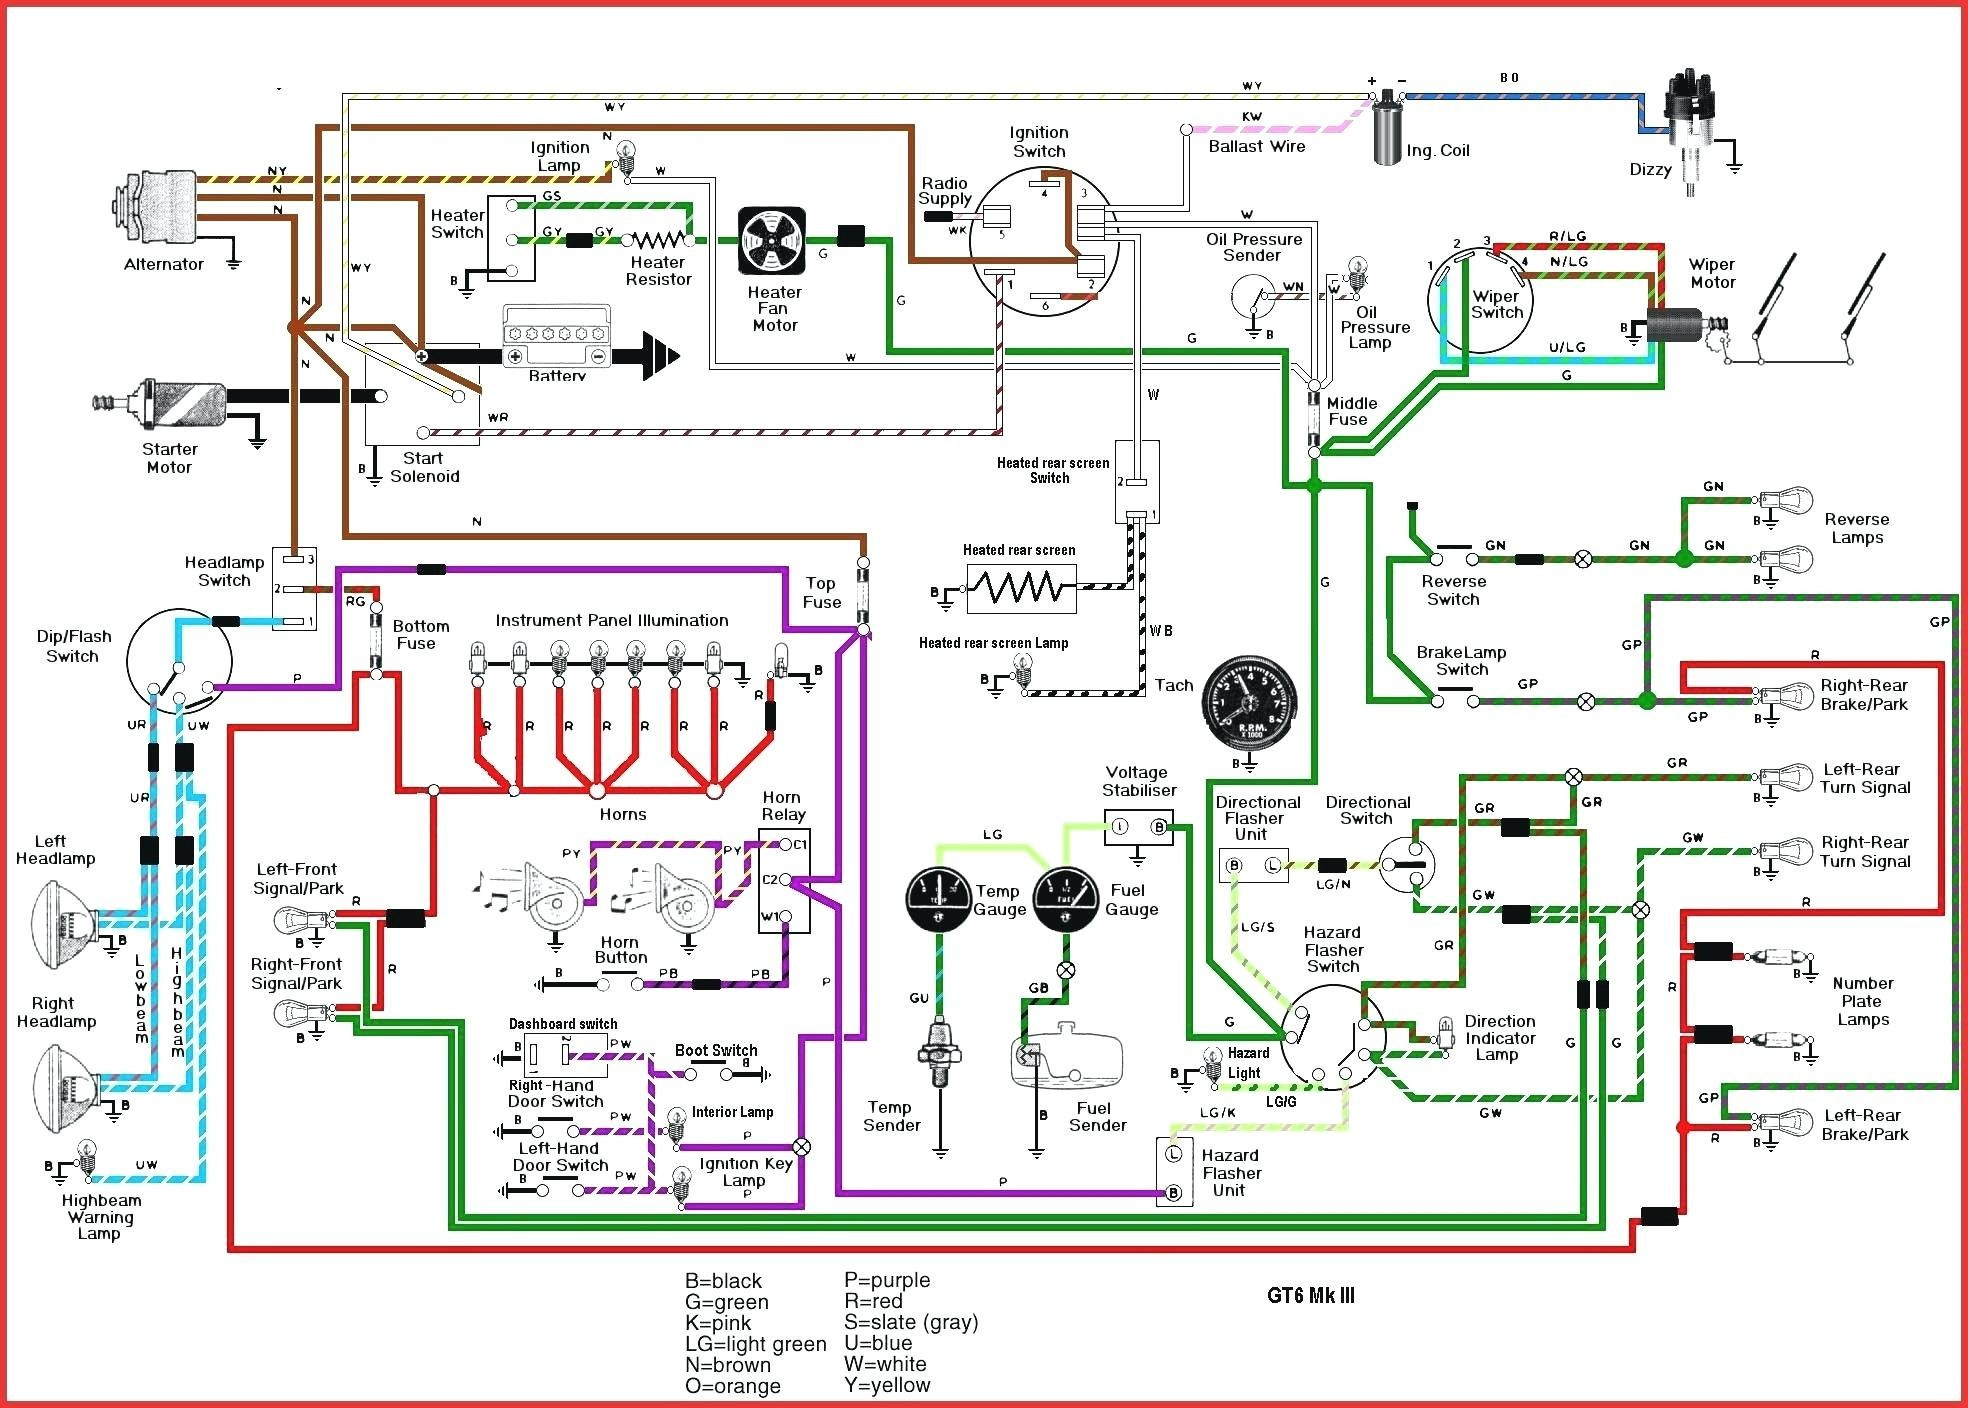 Home Electrical Wiring Diagrams Electrical Wiring Diagram Of The House Wiring Diagram Article